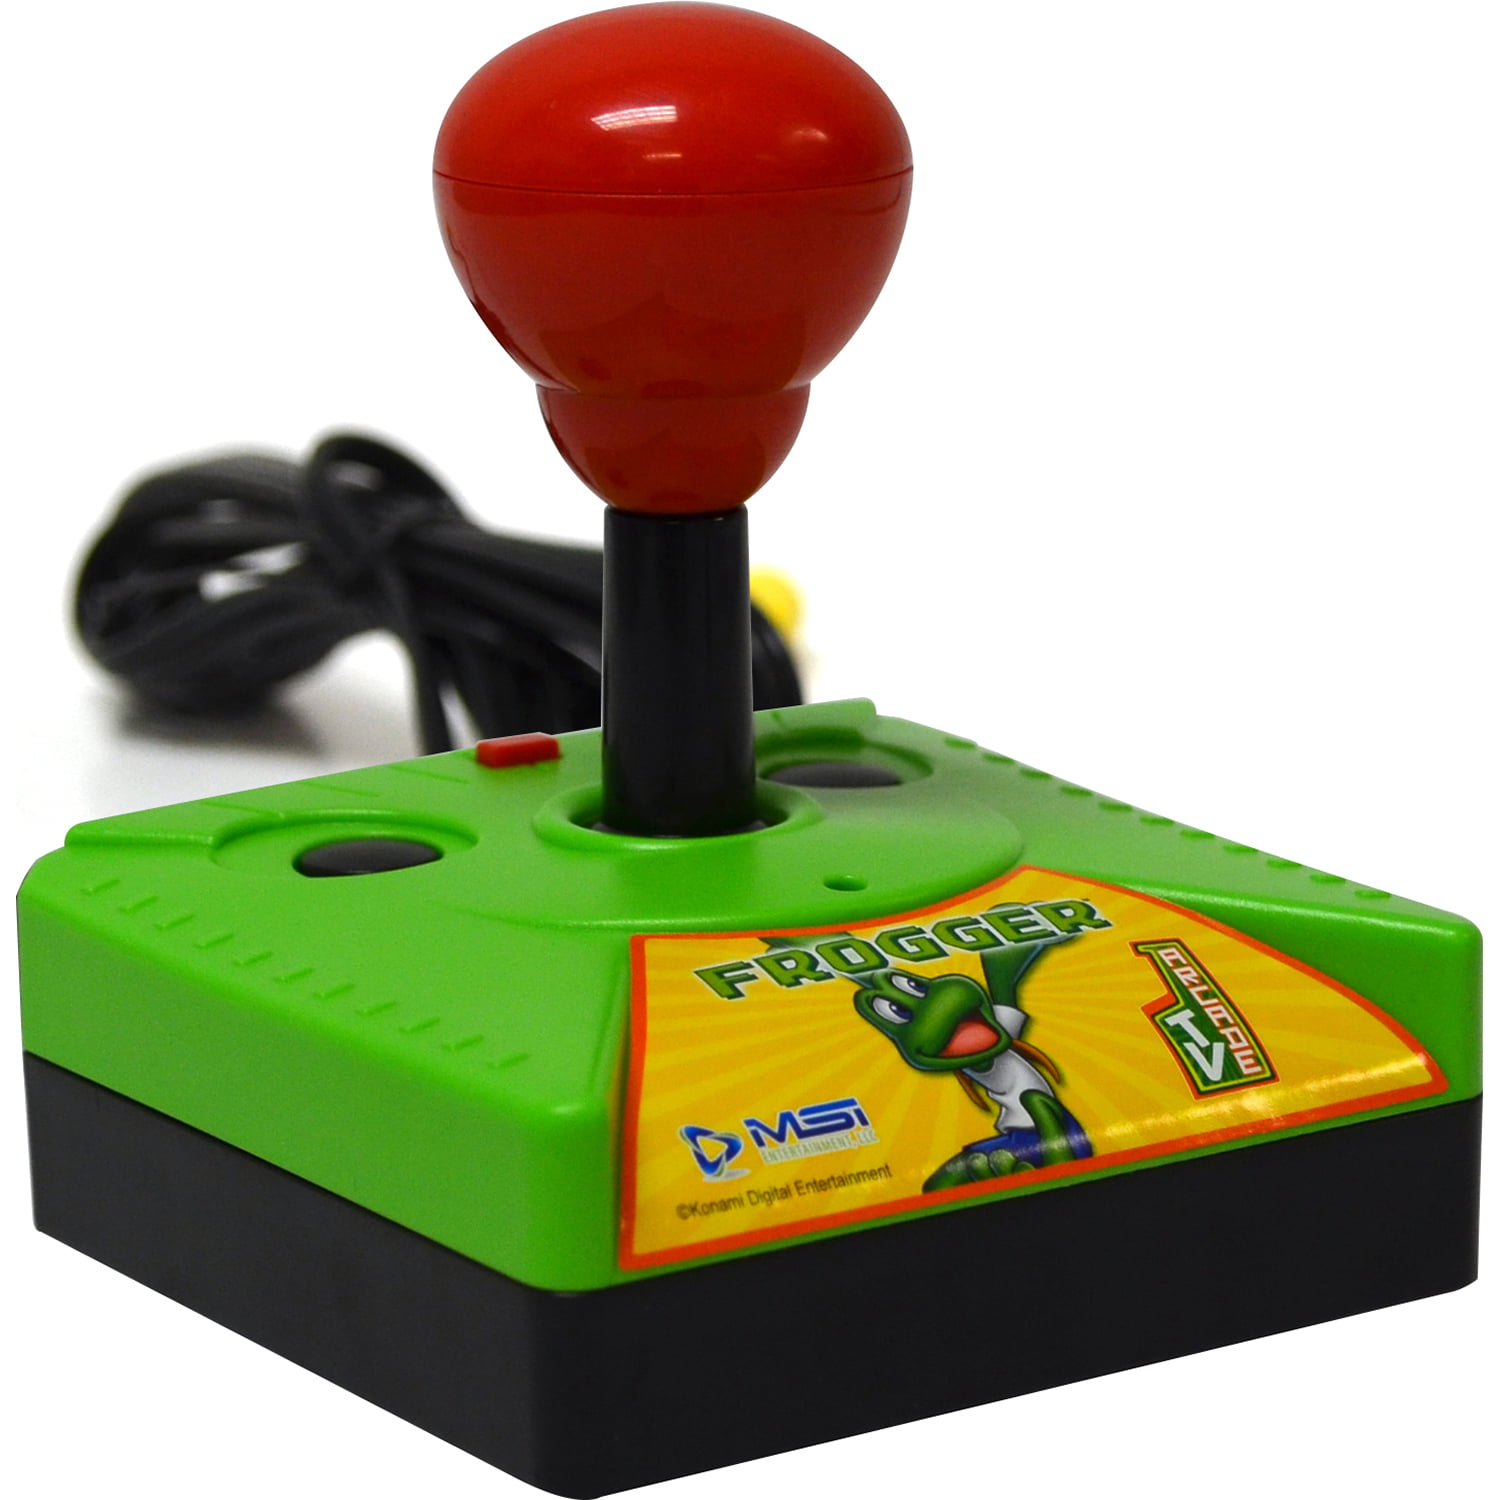 2019 Version MSI Frogger Hand Held Plug & Play TV Arcade Game Ages 5 for sale online 